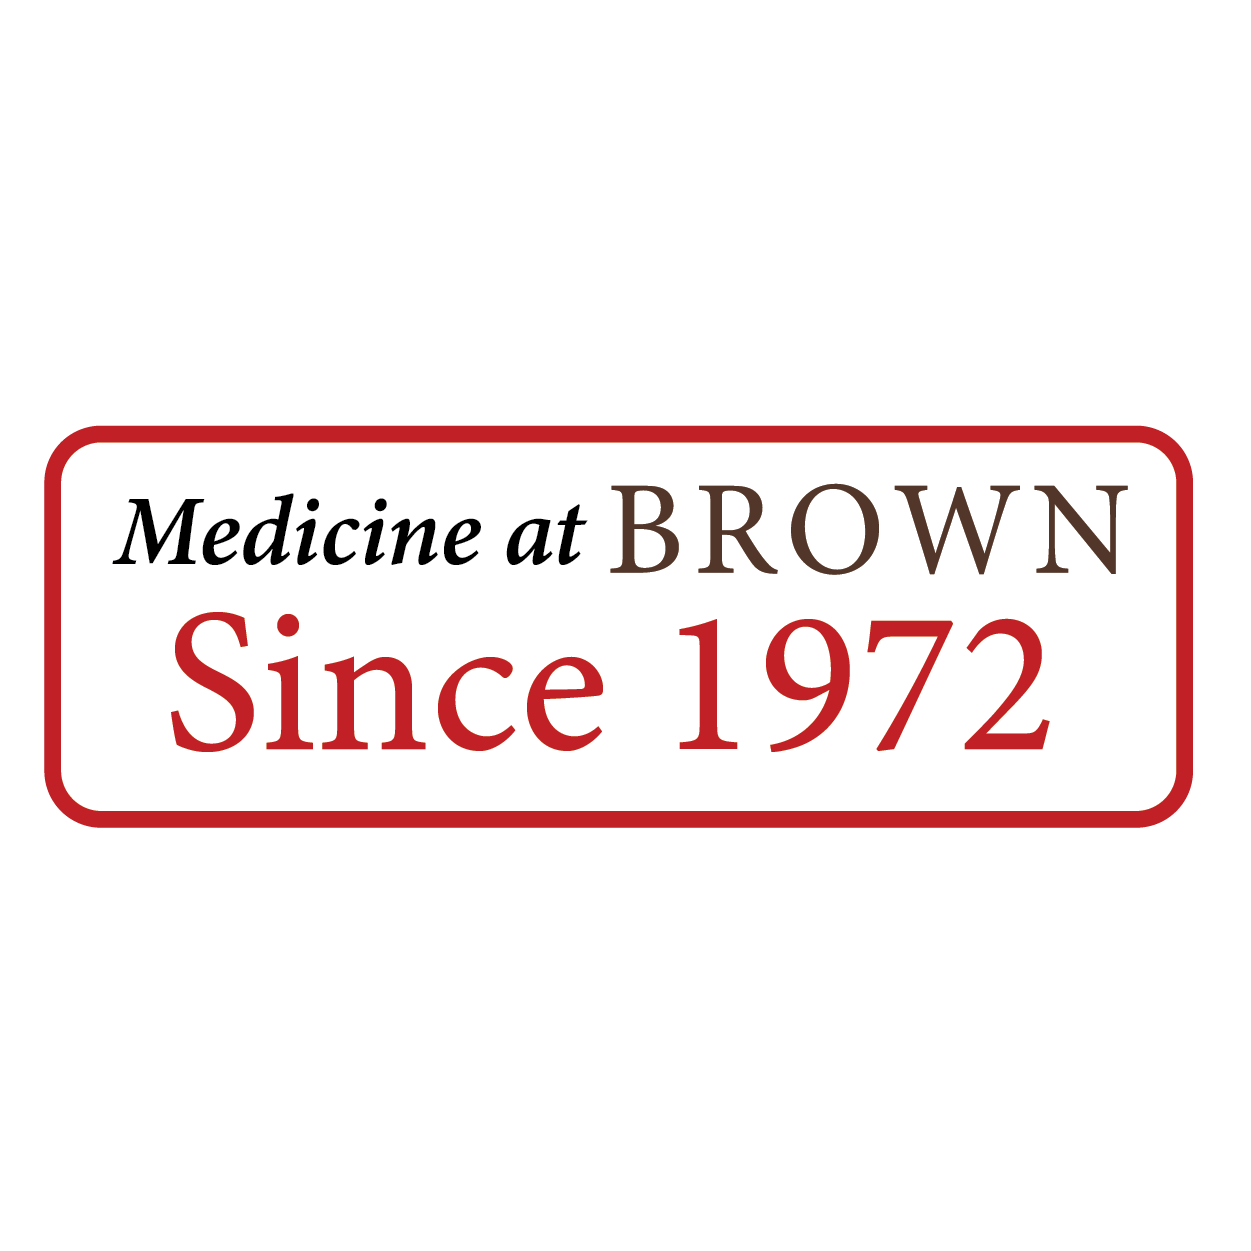 Brown 50 years of medicine since 1972 logo